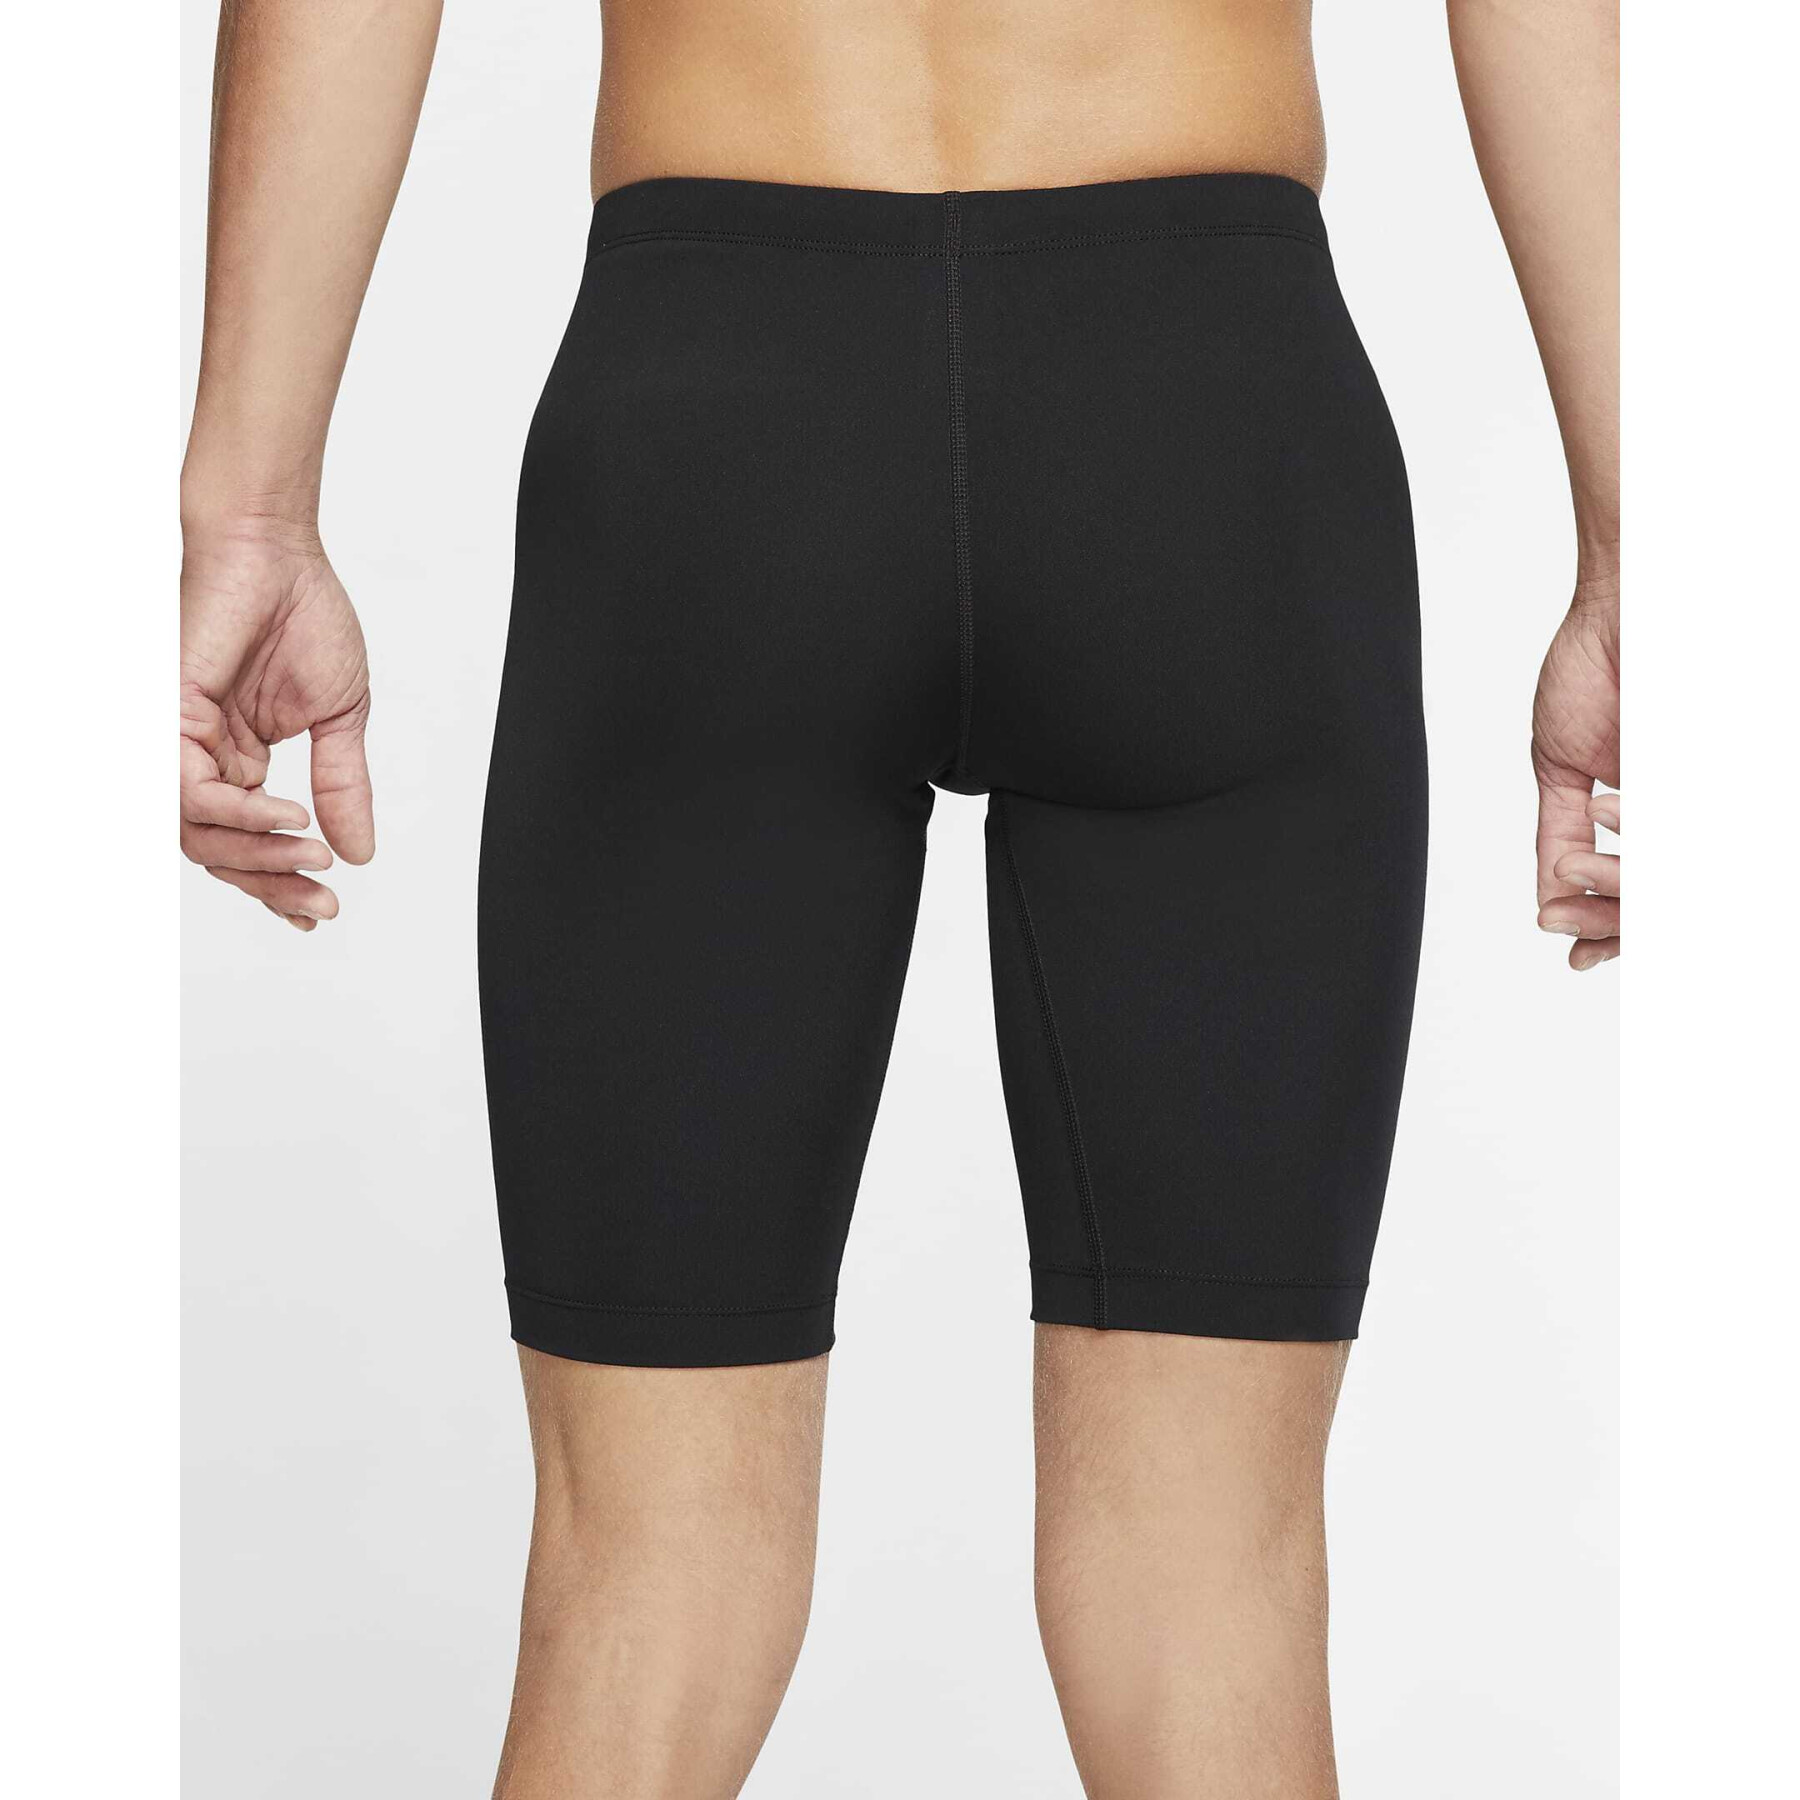 Jammer Nike Swim Hydrastrong Solid